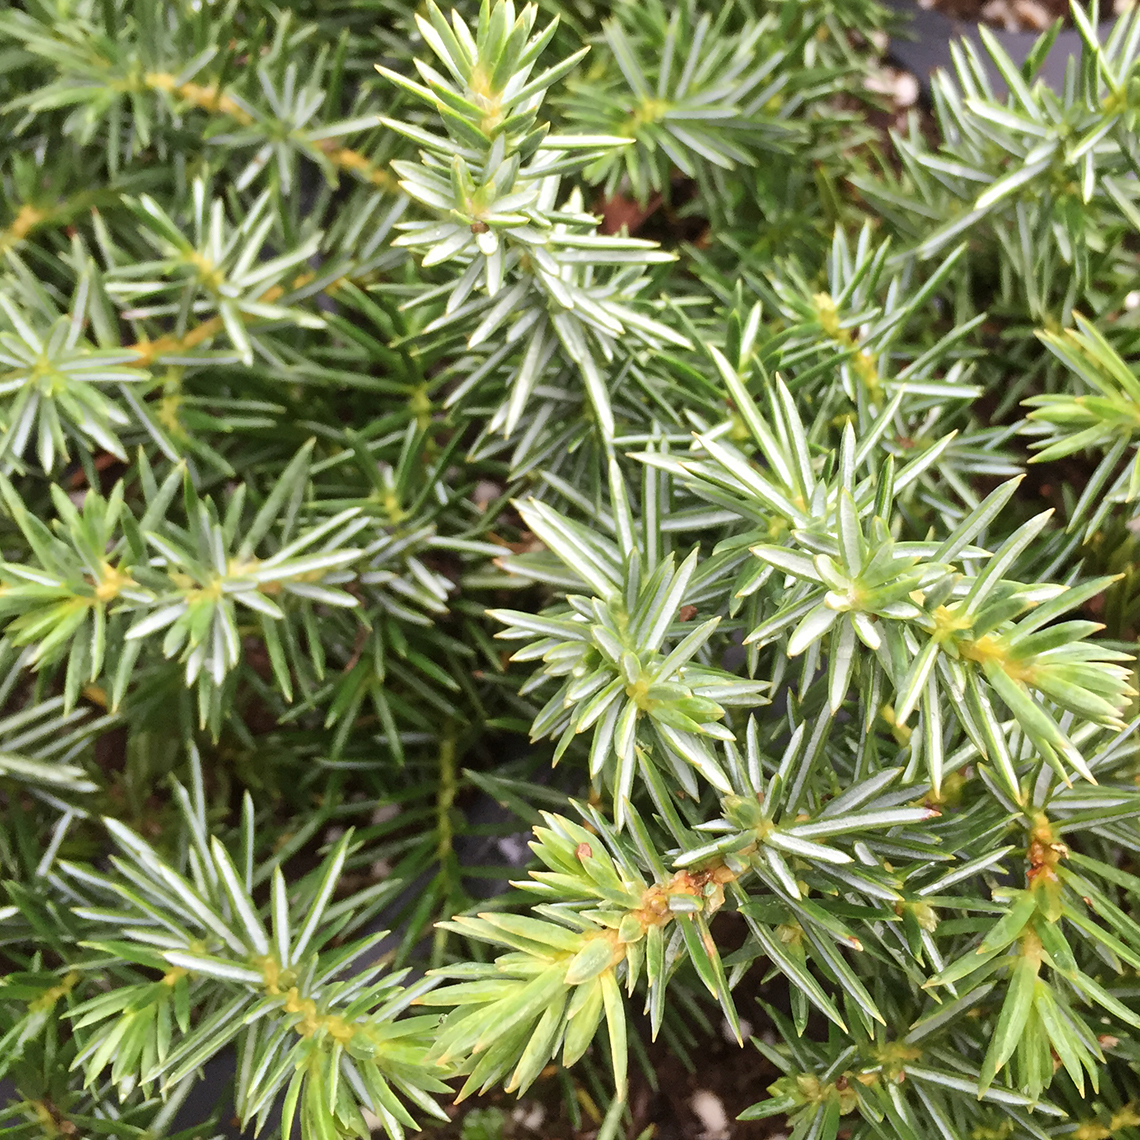 Close up of silver lined foliage of Juniperus Silver Mist